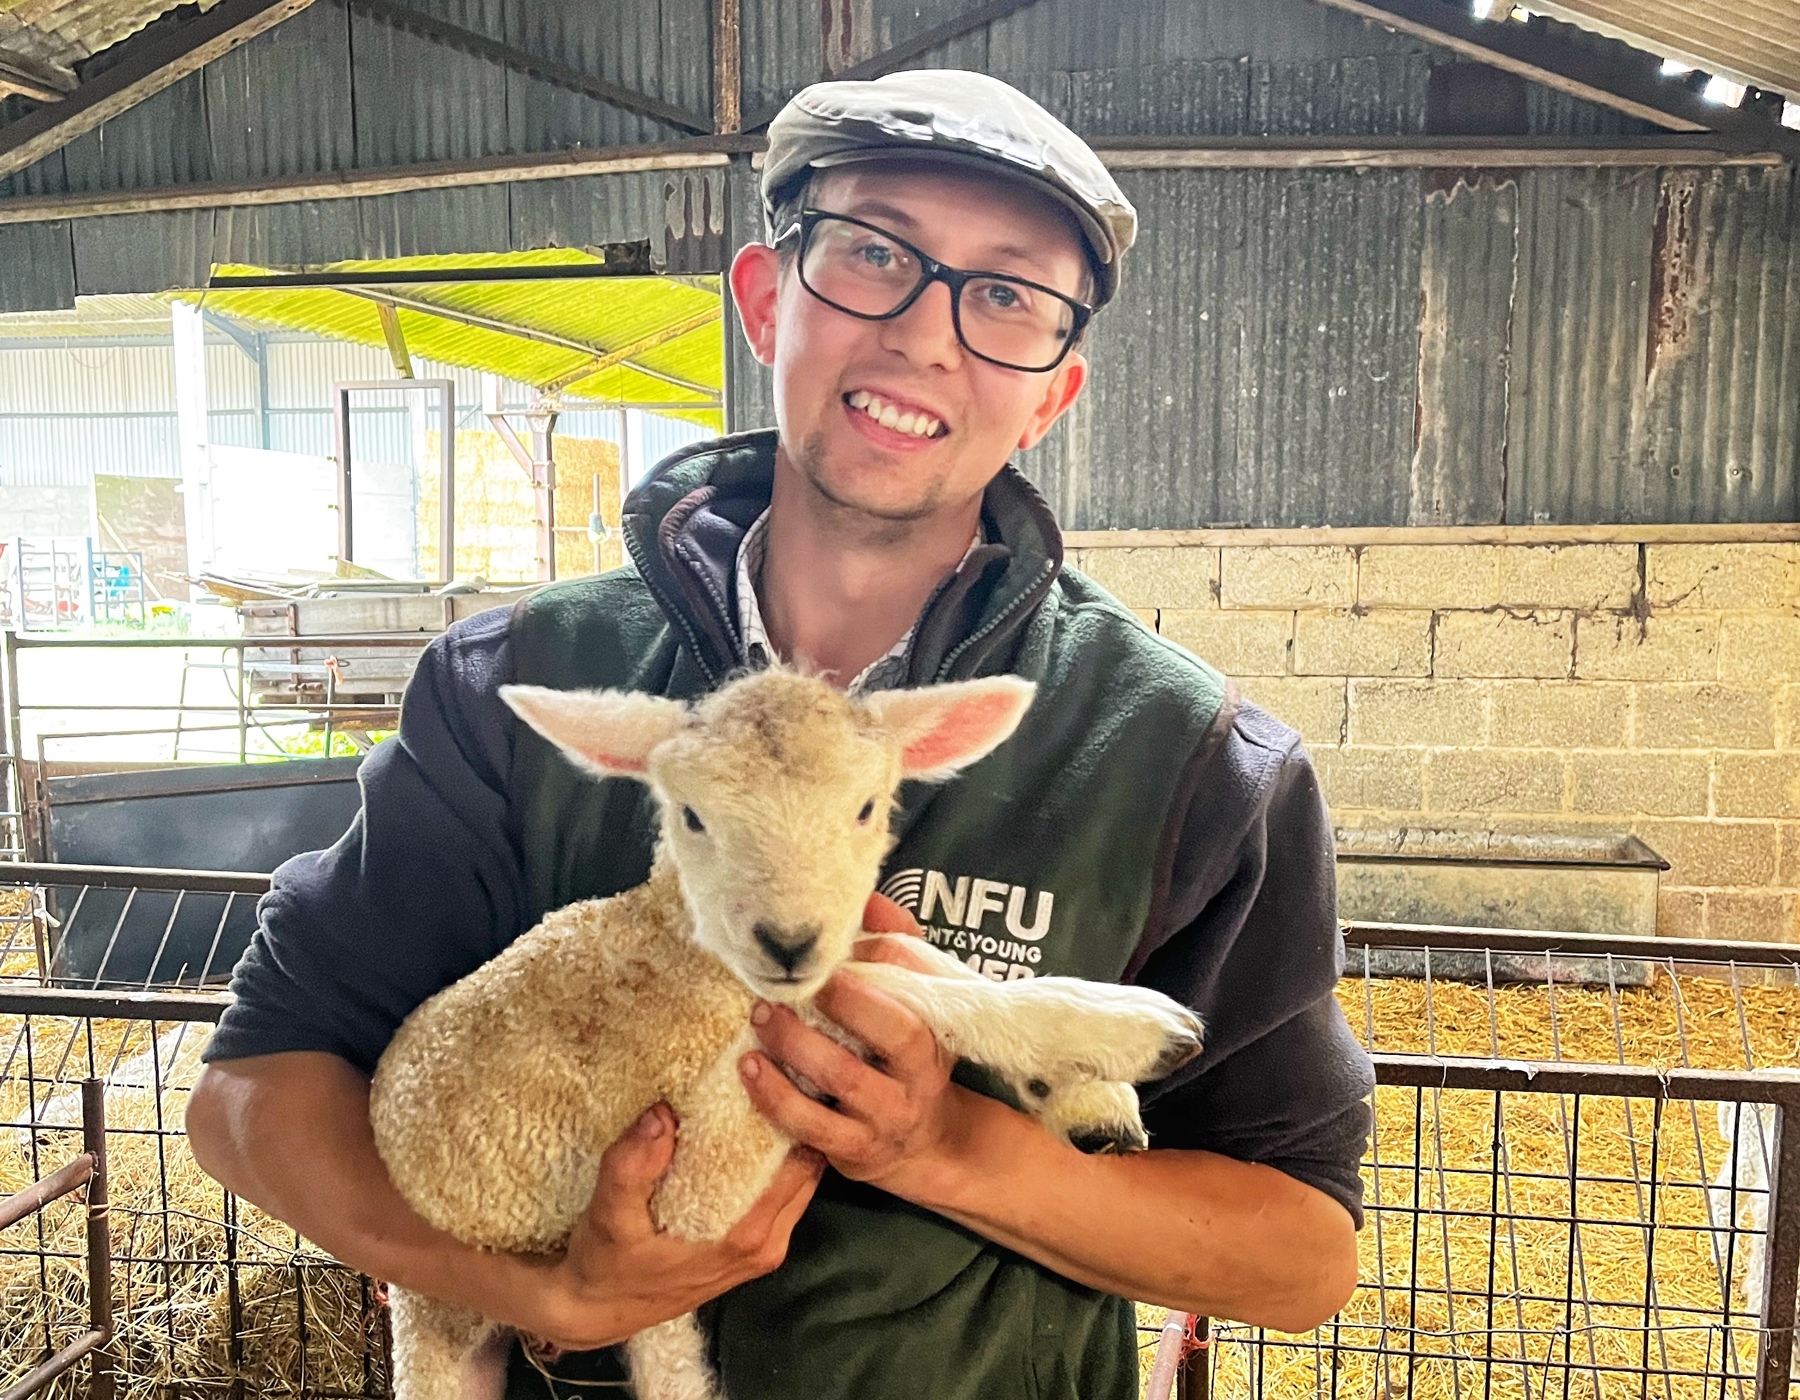 Karl Franklin is holding a lamb in his arms and is smiling at the camera. He's stood in a lambing shed filled with hay and is wearing glasses and a flat cap.